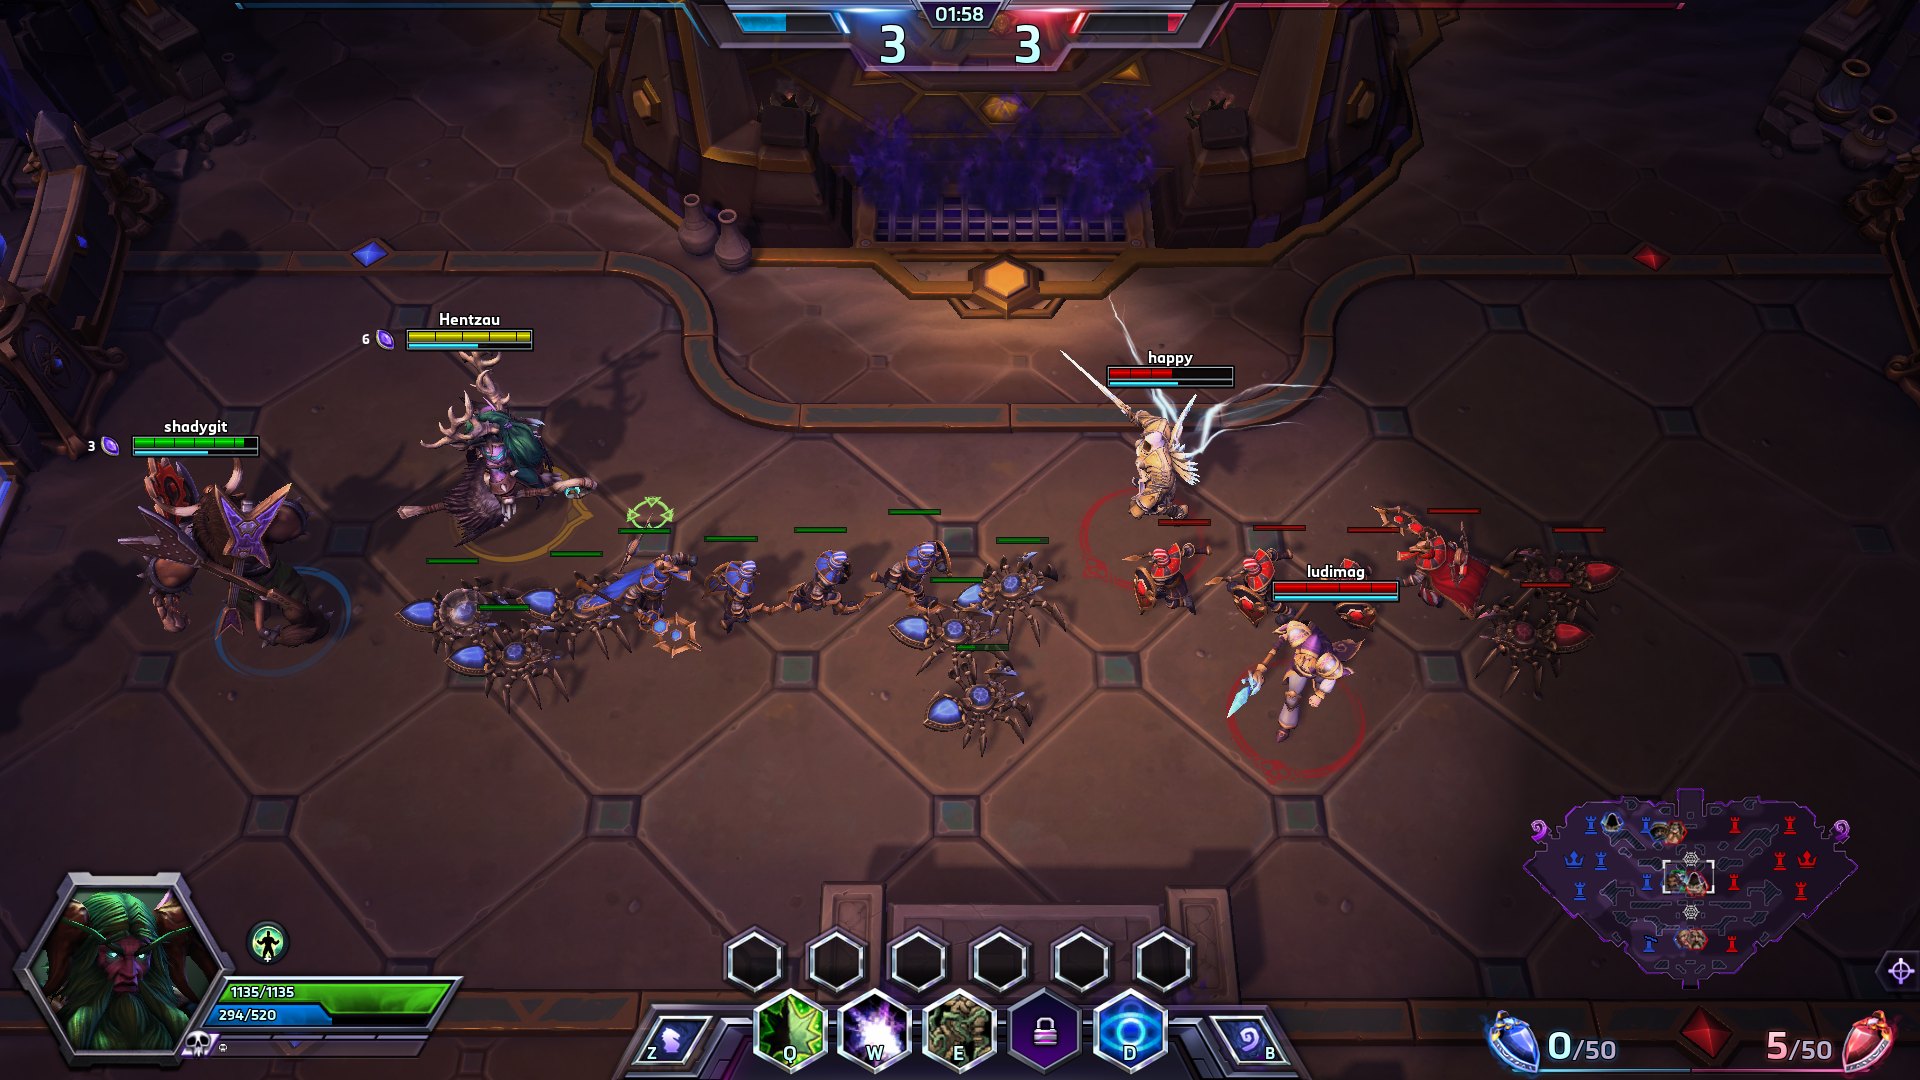 Blizzard shifts its top developers away from Heroes of the Storm